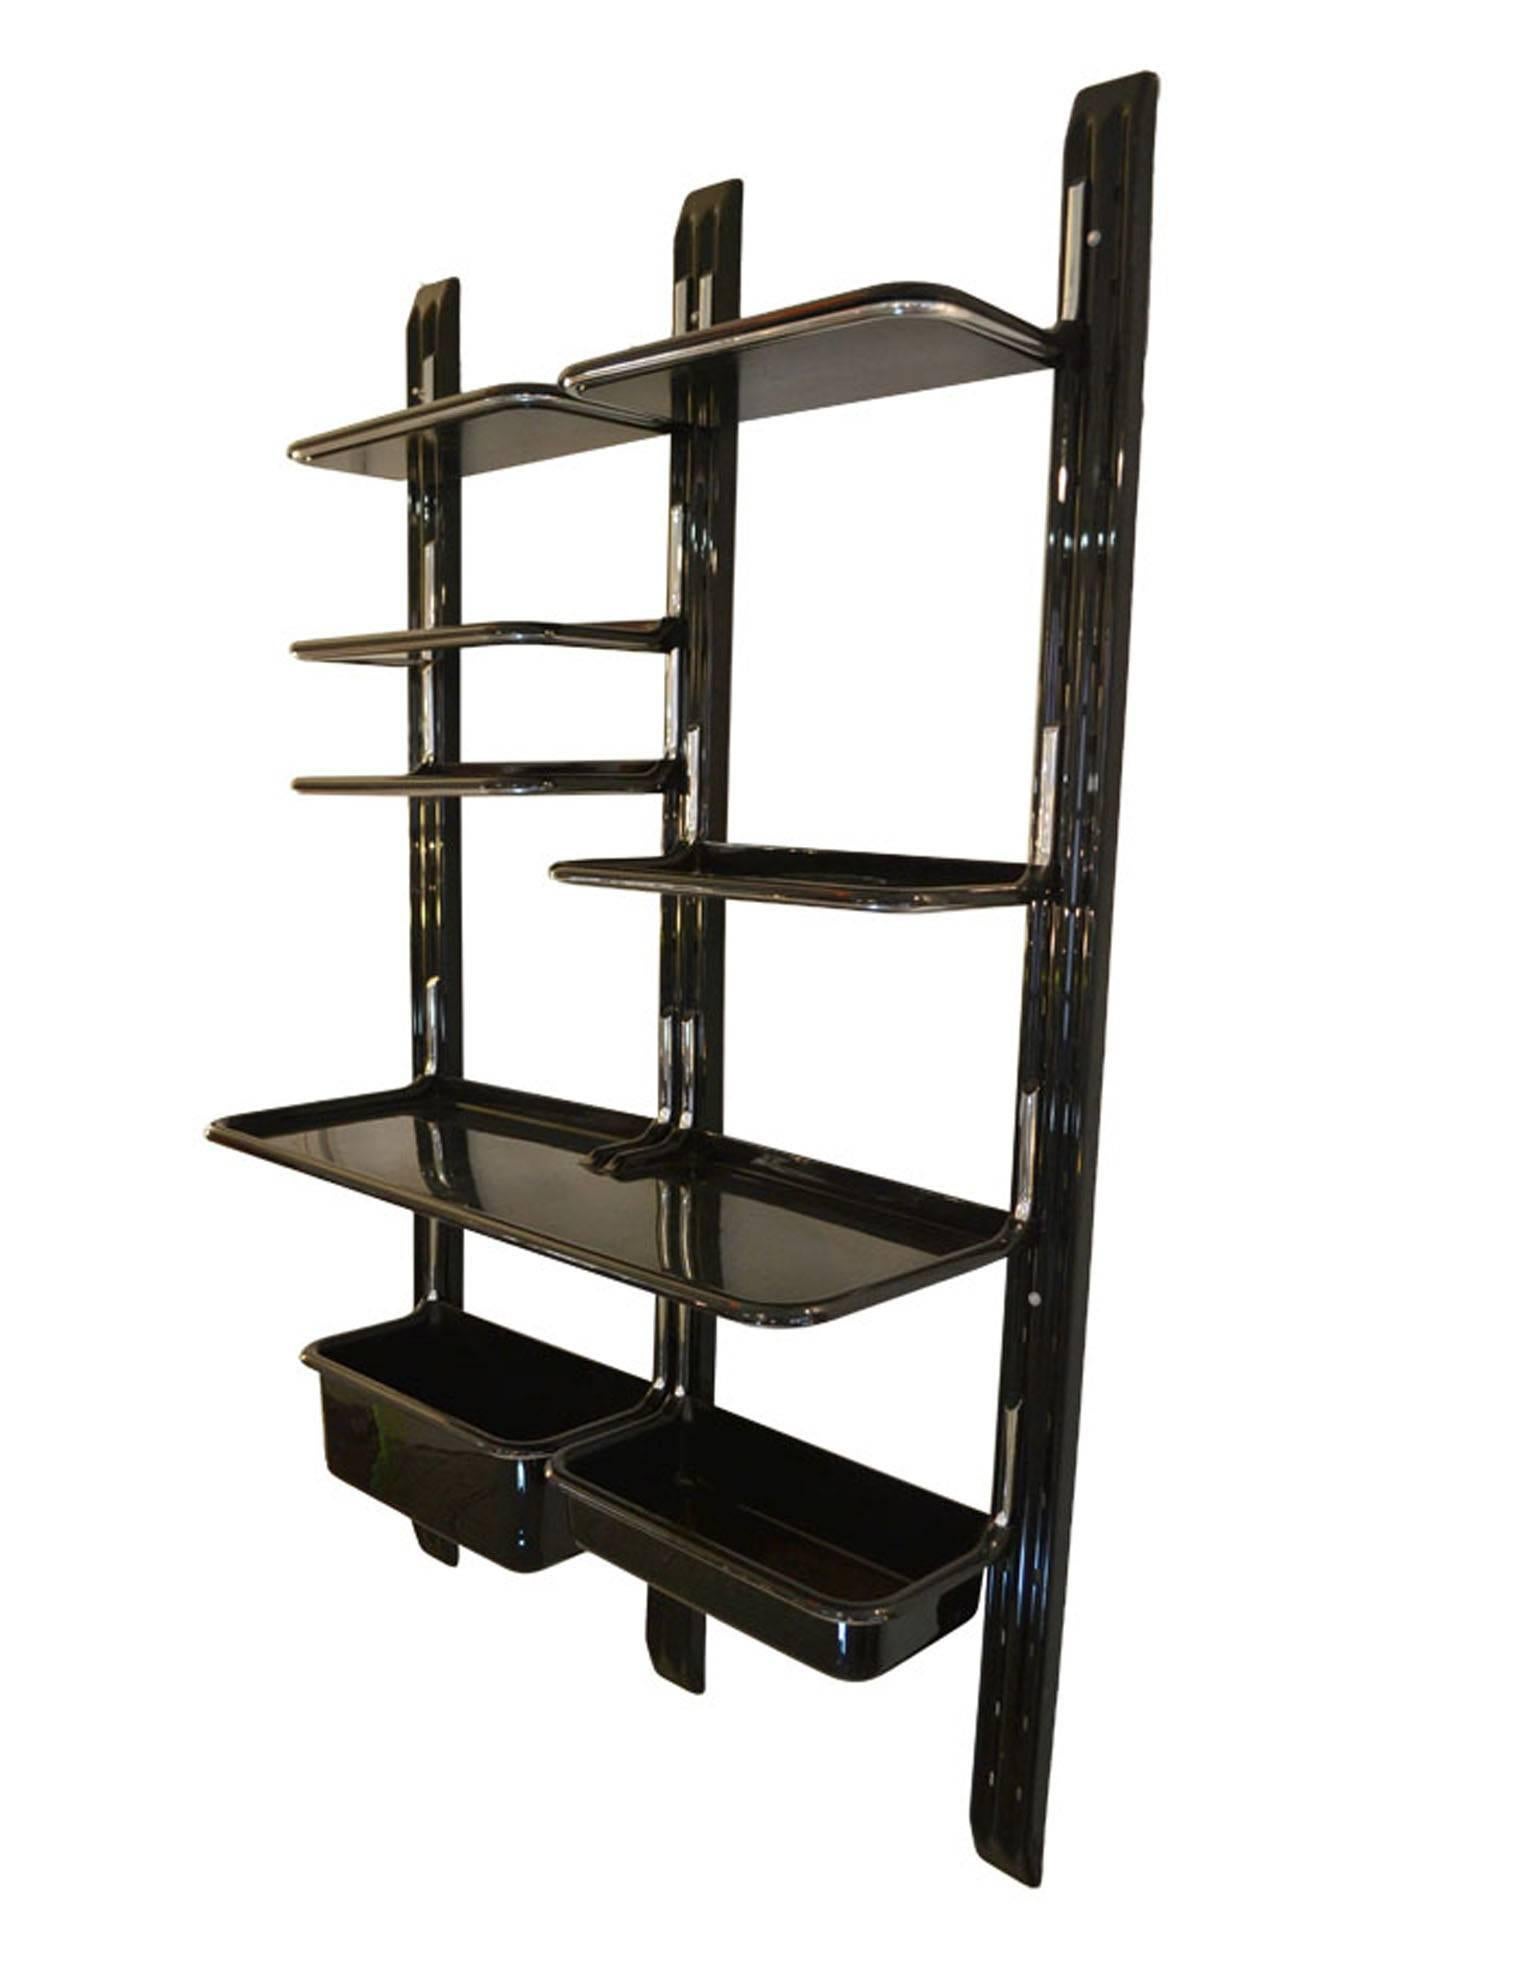 1970s wall bookcase prod. Saporiti Italy.
Wholly in plastic, with interlocking uprights and shelves supports, in chromed steel.
Includes two containers, one big shelf and five small shelves.

